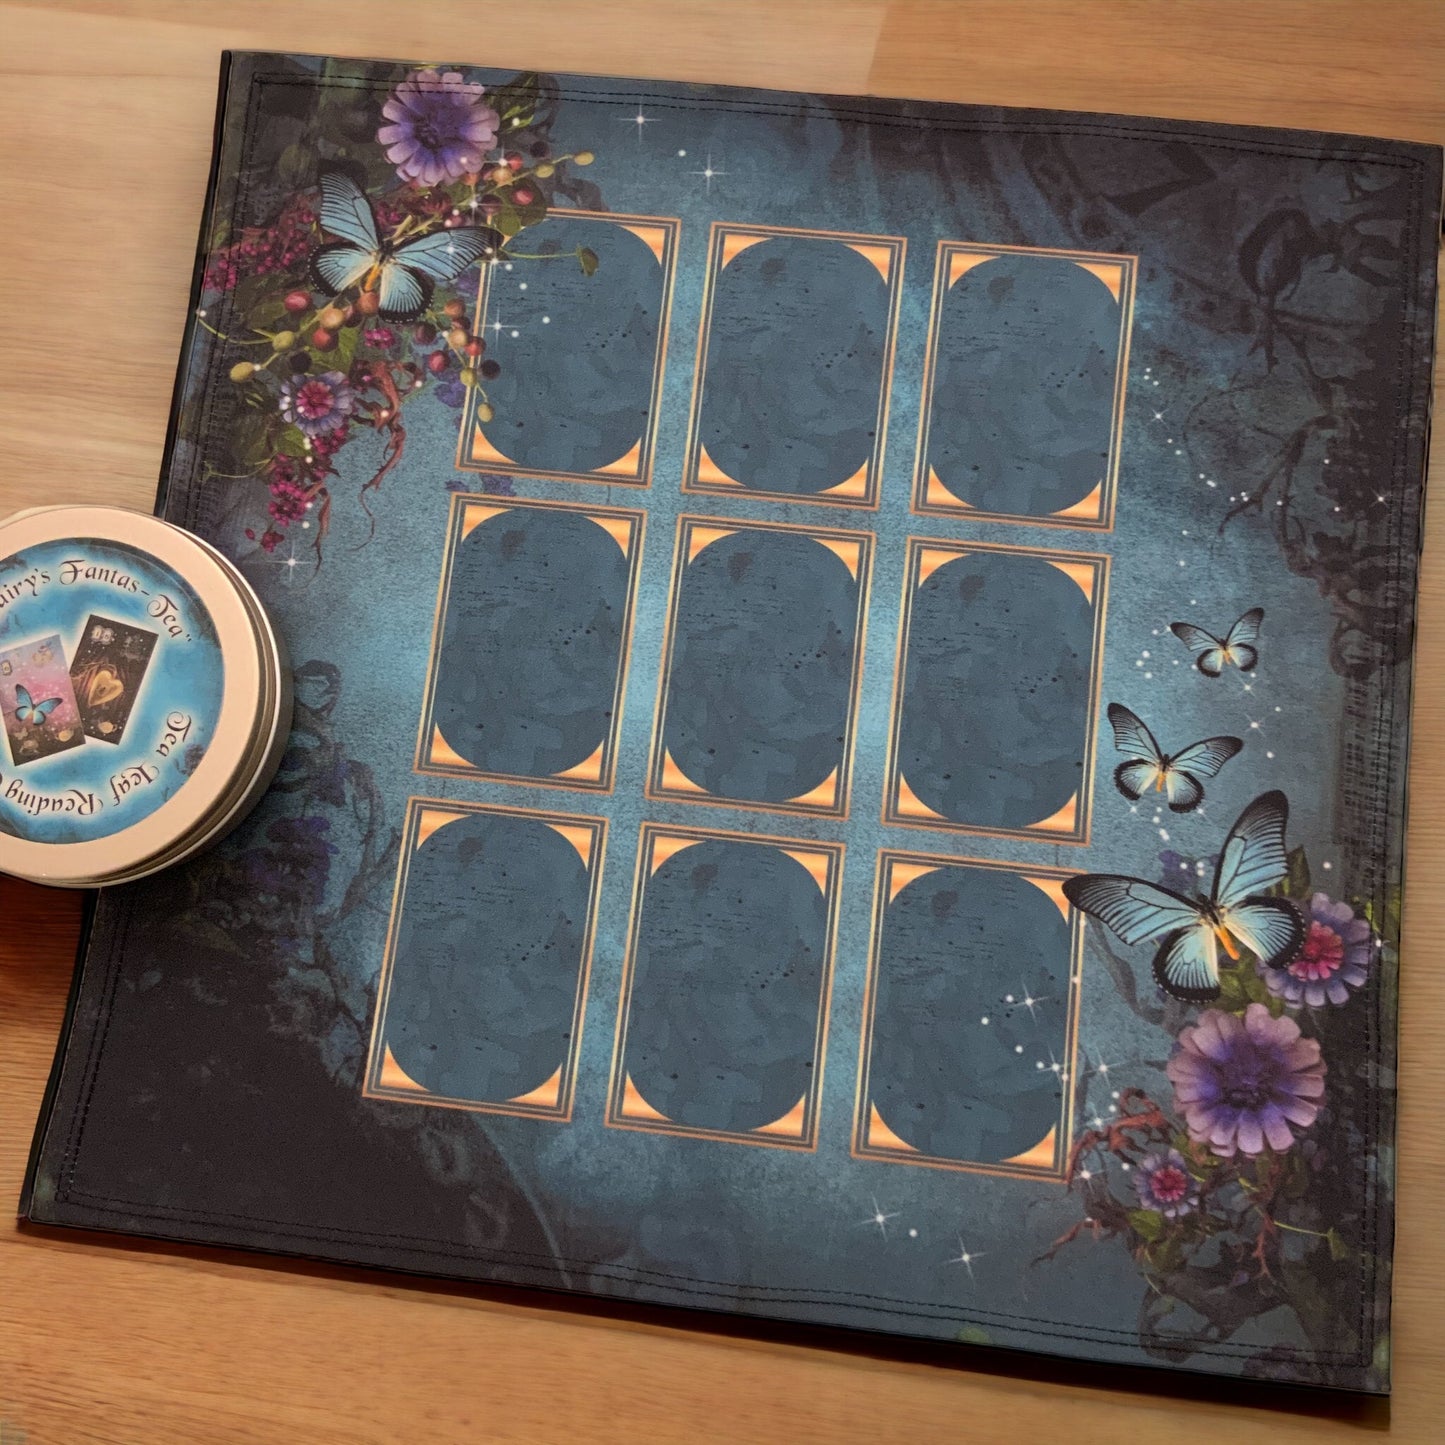 Turquoise 9 Box layout mat for Oracle Cards, Tarot, Lenormand.